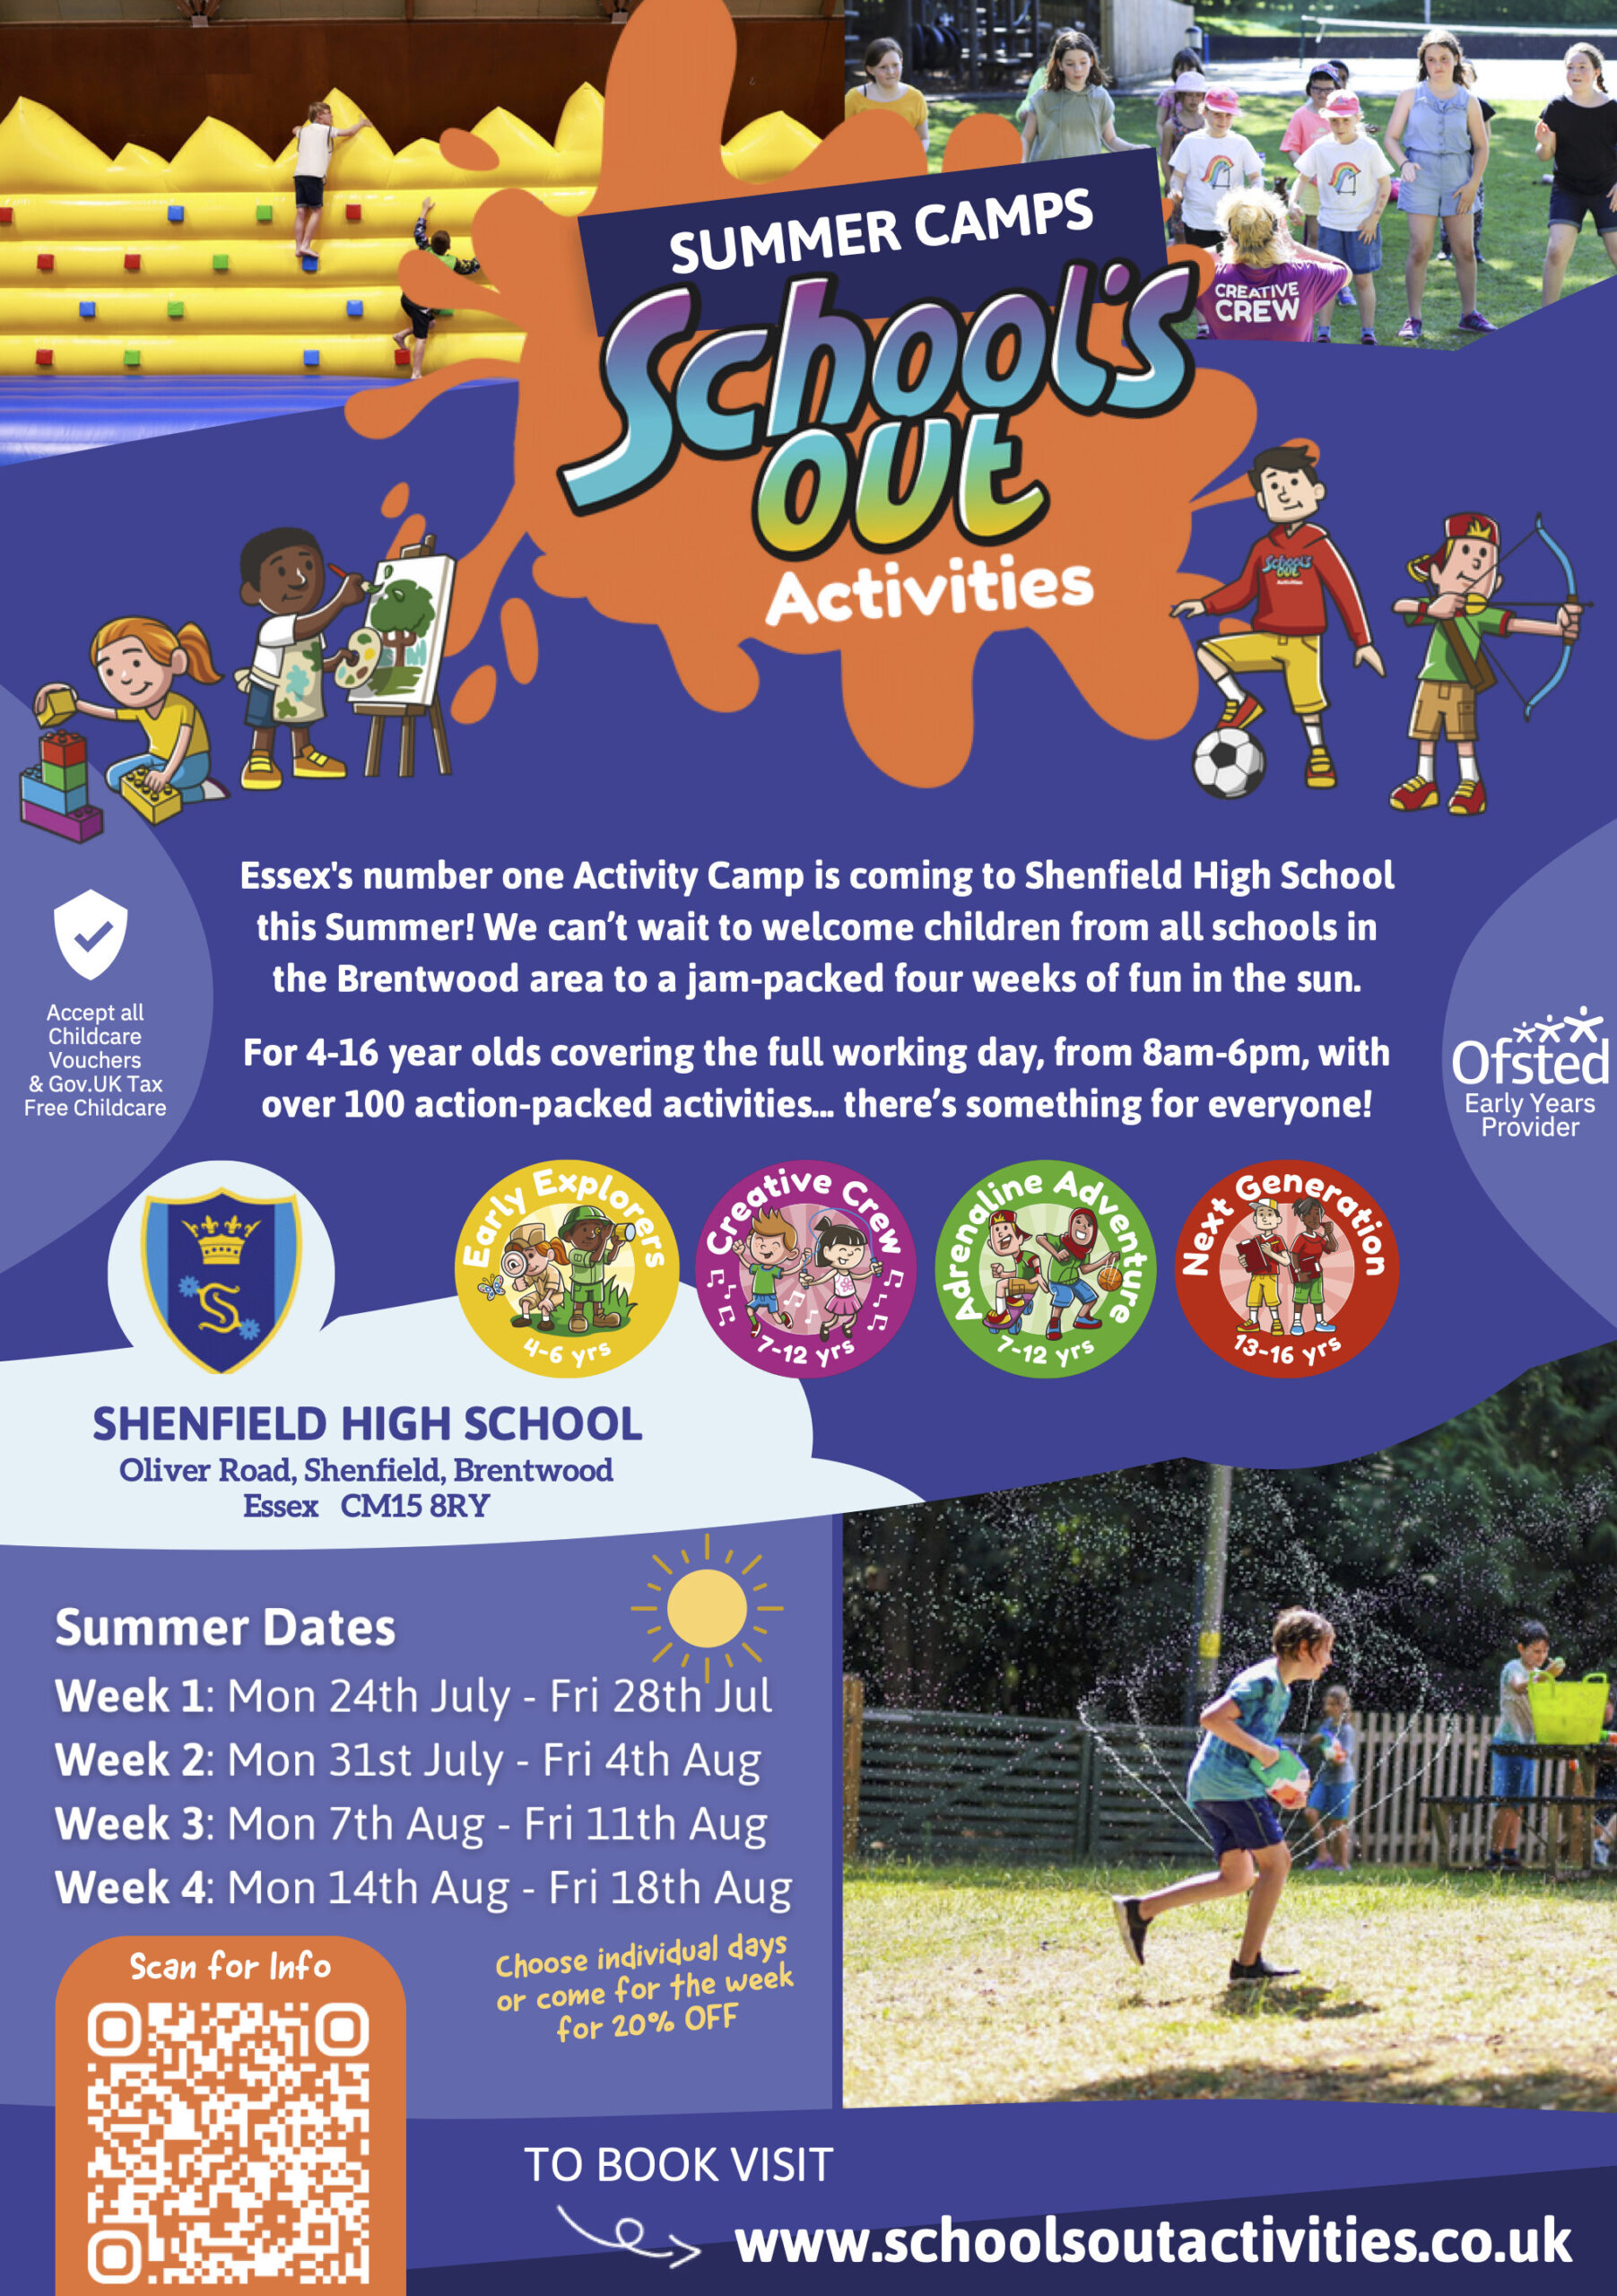 School’s Out Activities at Shenfield High School